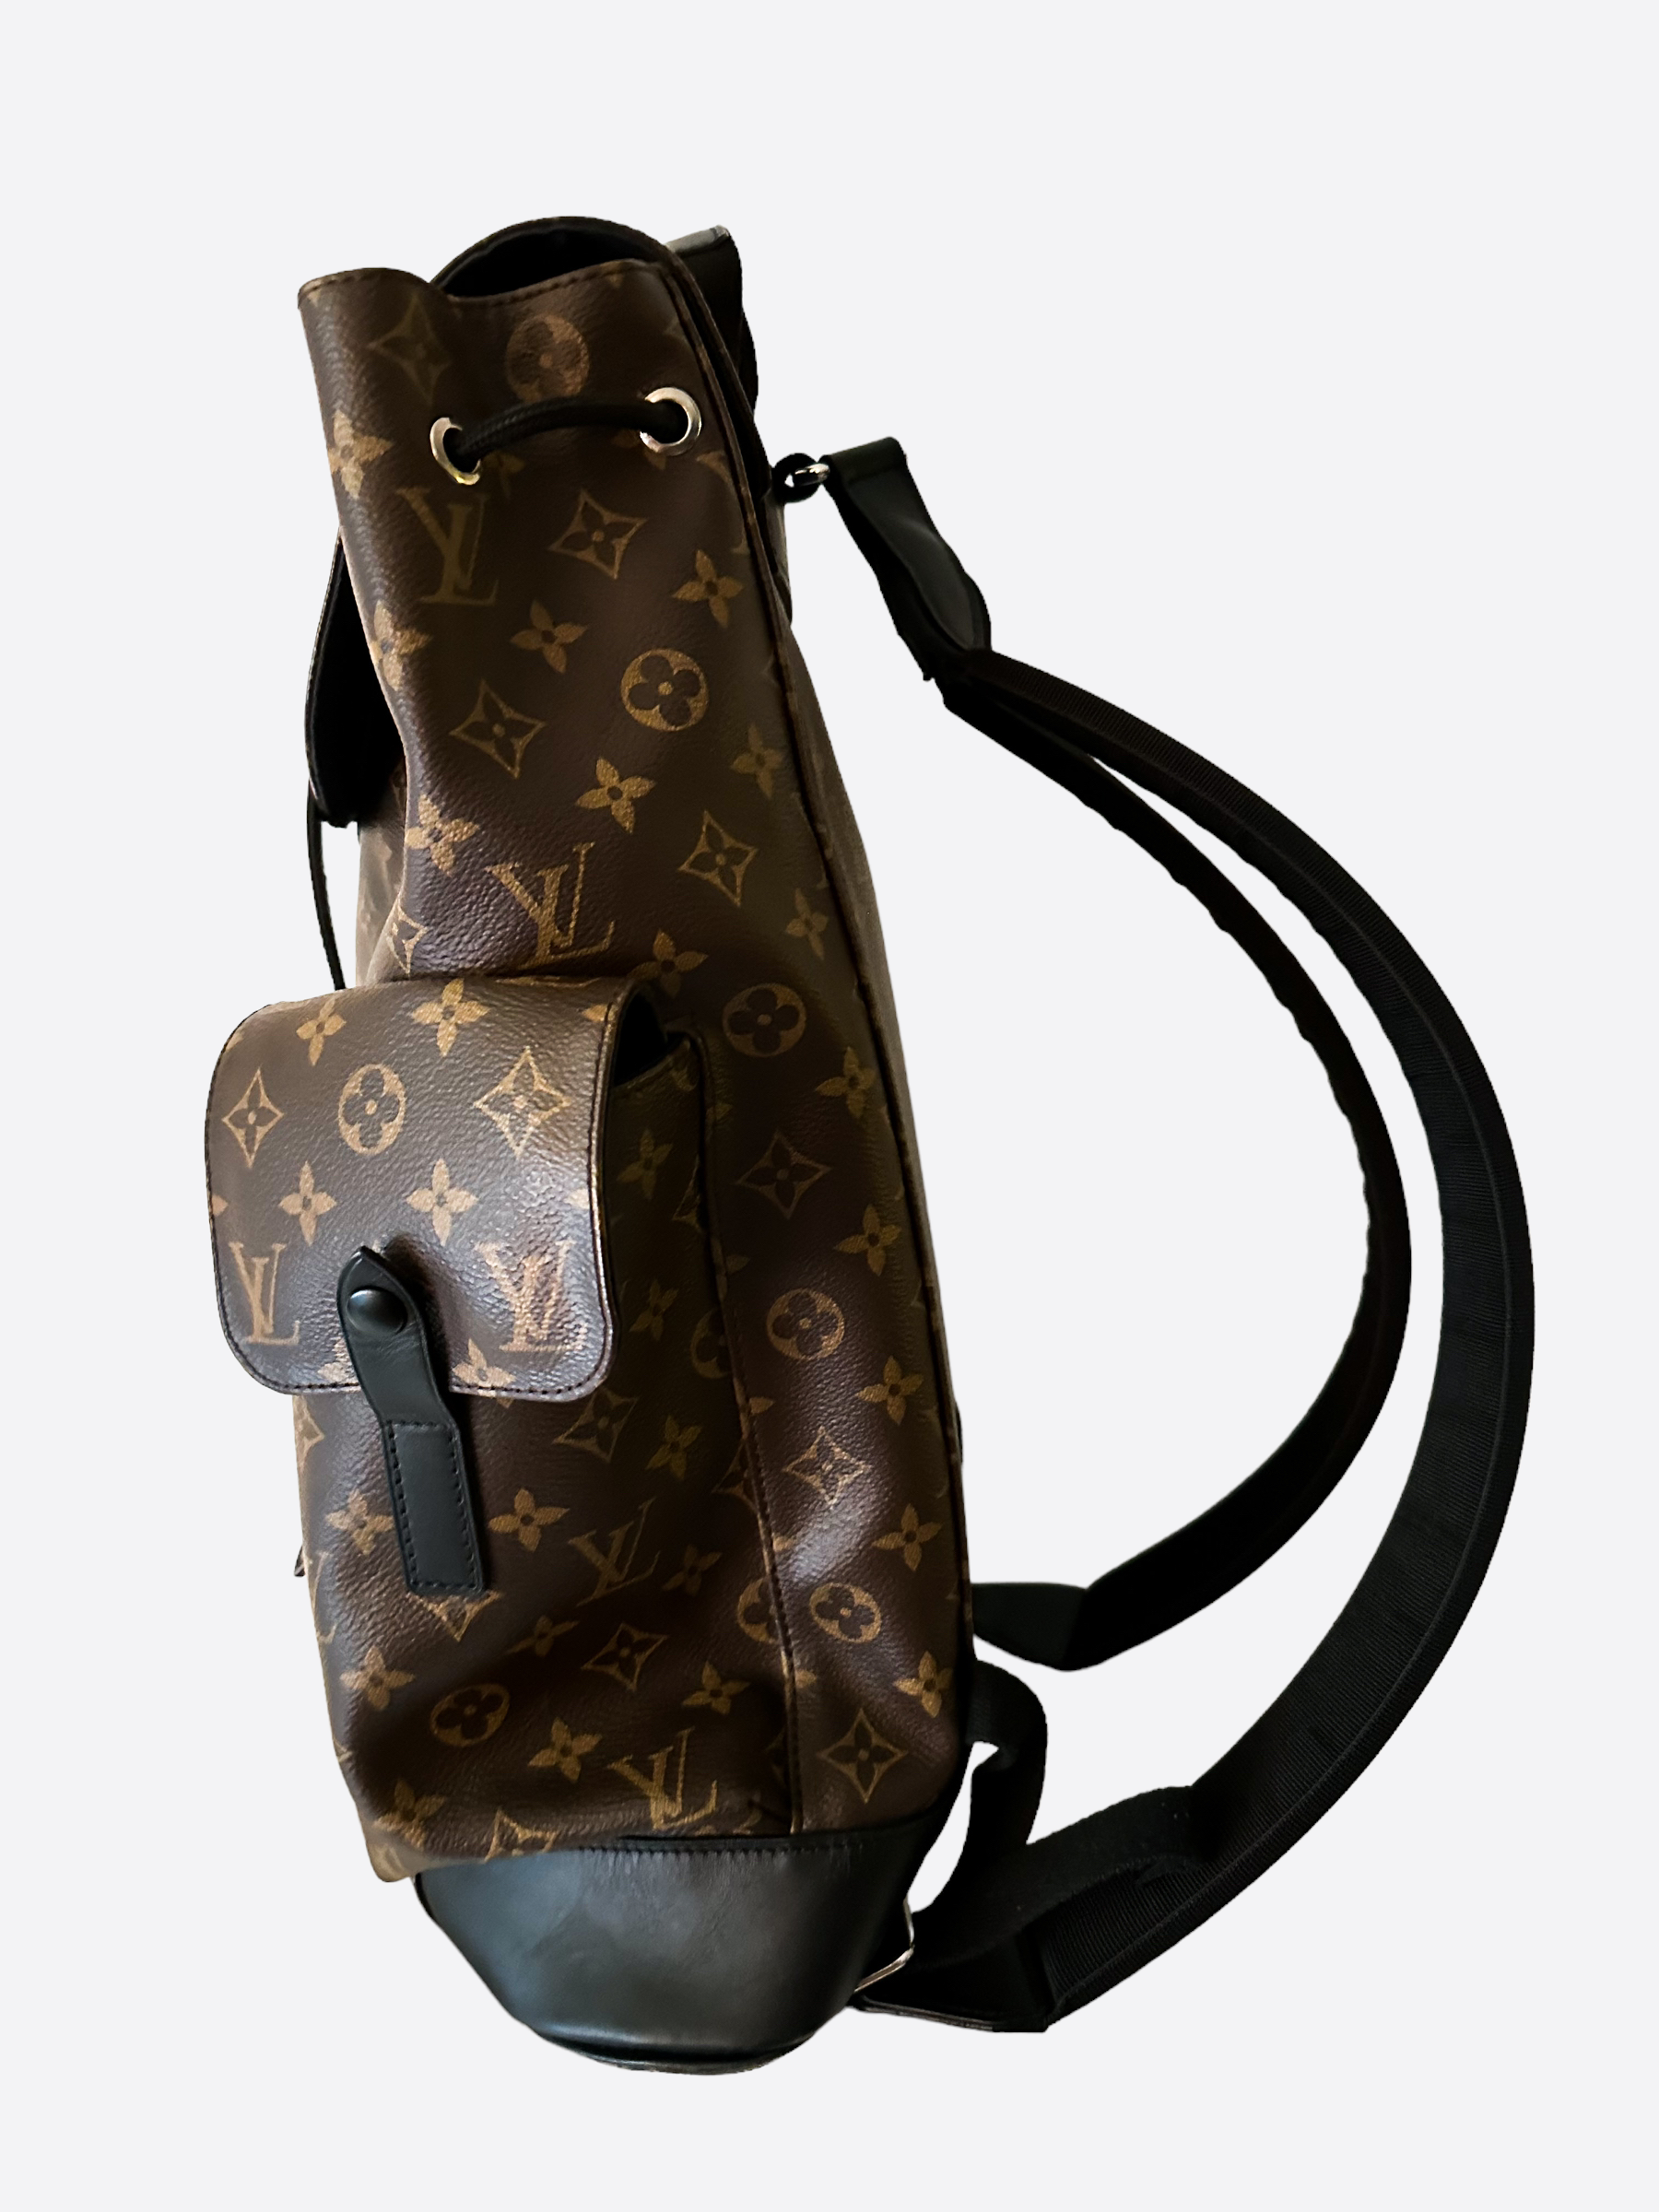 Christopher backpack leather travel bag Louis Vuitton Brown in